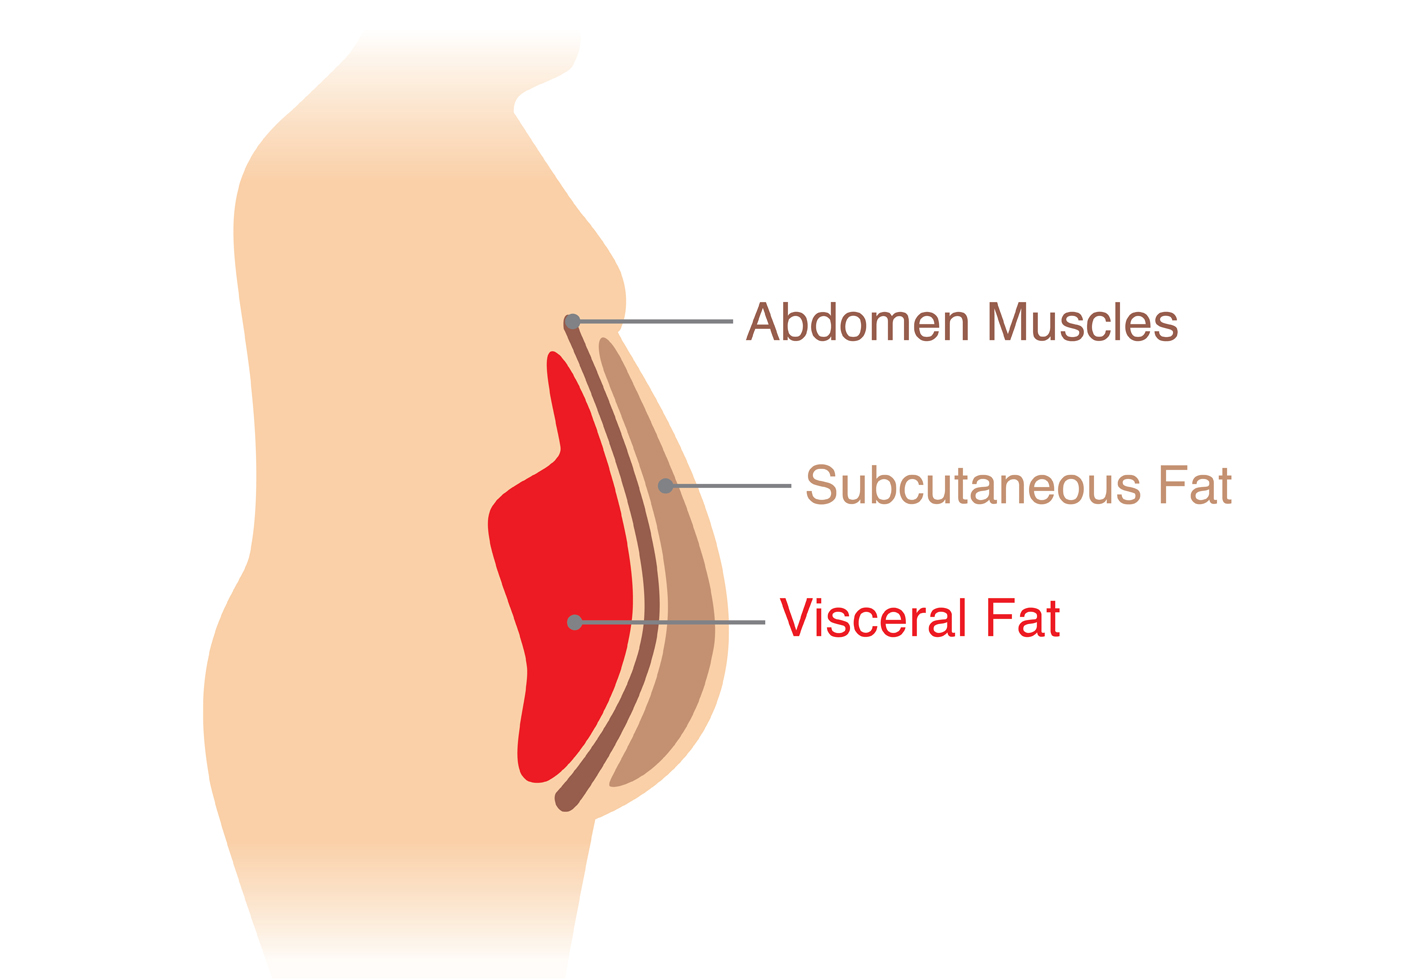 Illustration of where visceral fat is stored in the body. It is located under the top layer of subcutaneous fat and abdominal muscles.